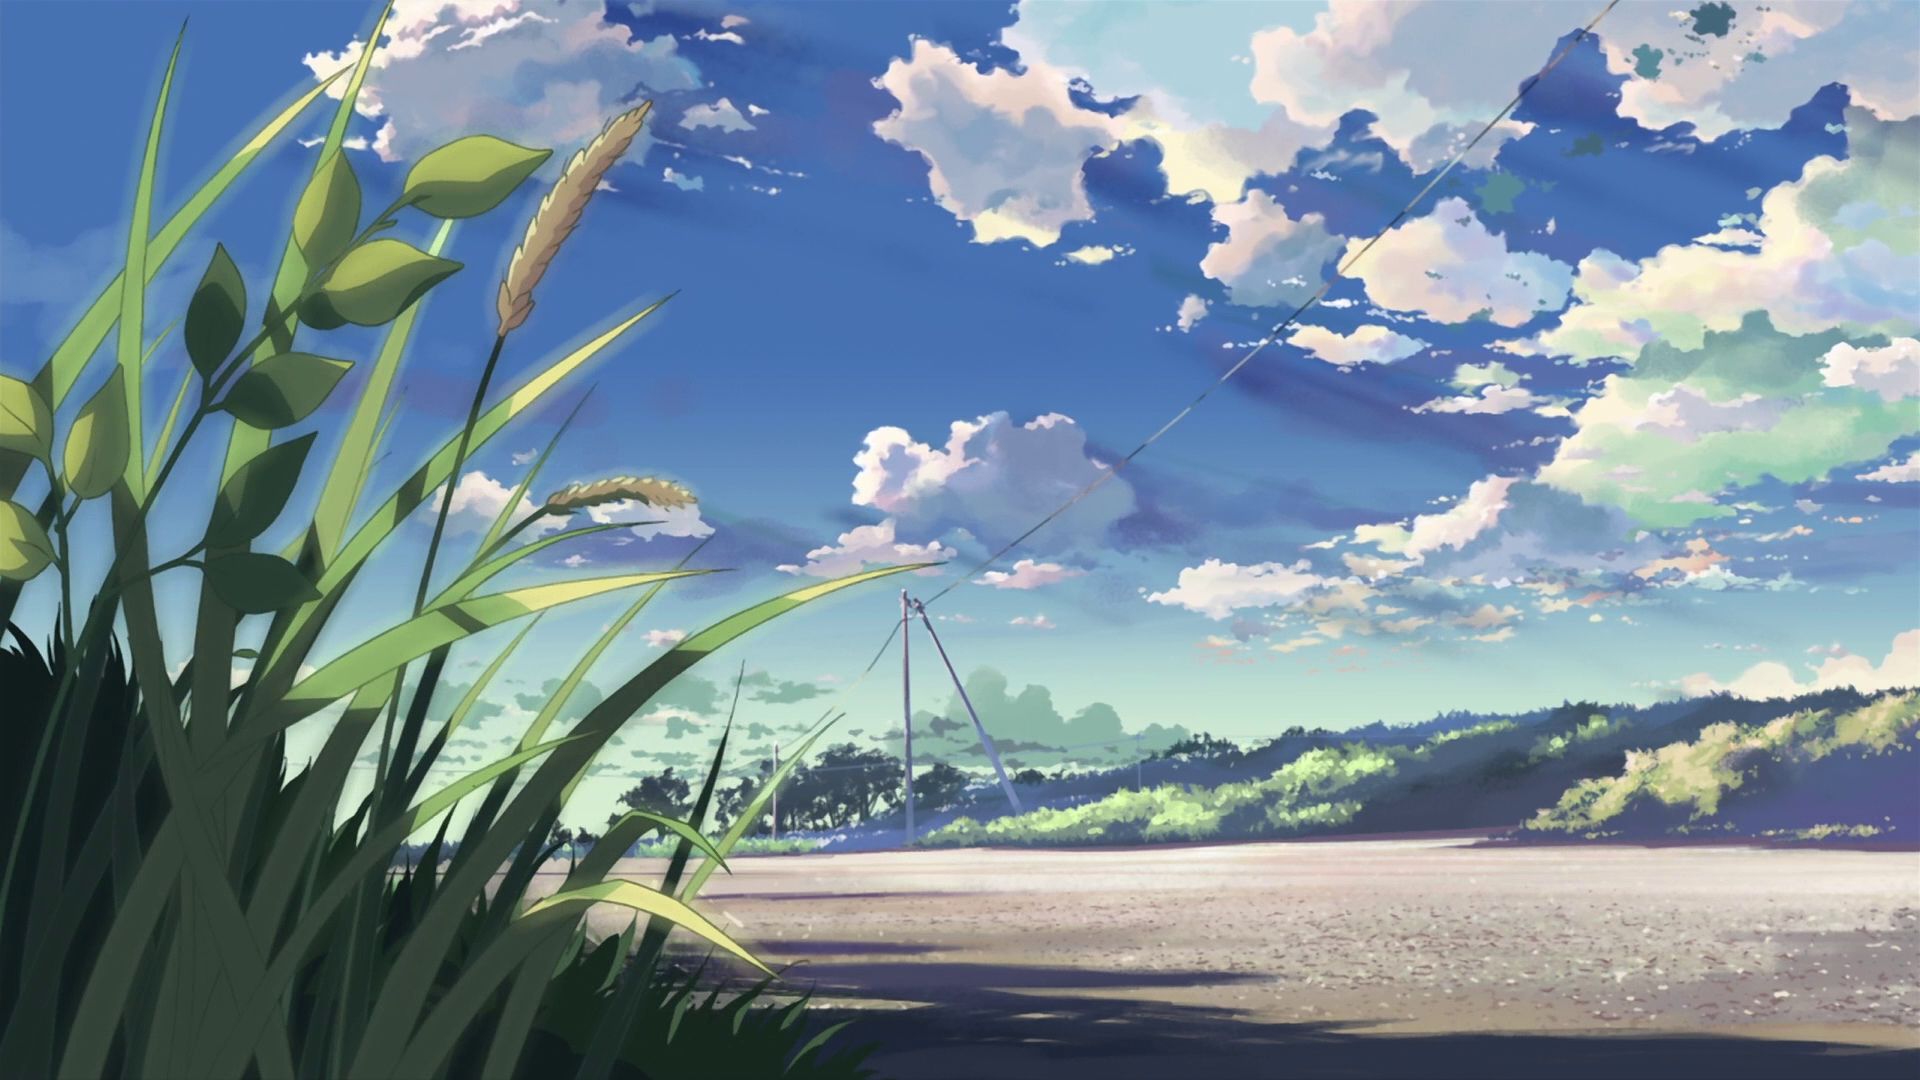 Anime Nature Aesthetic Wallpaper Free Anime Nature Aesthetic Background